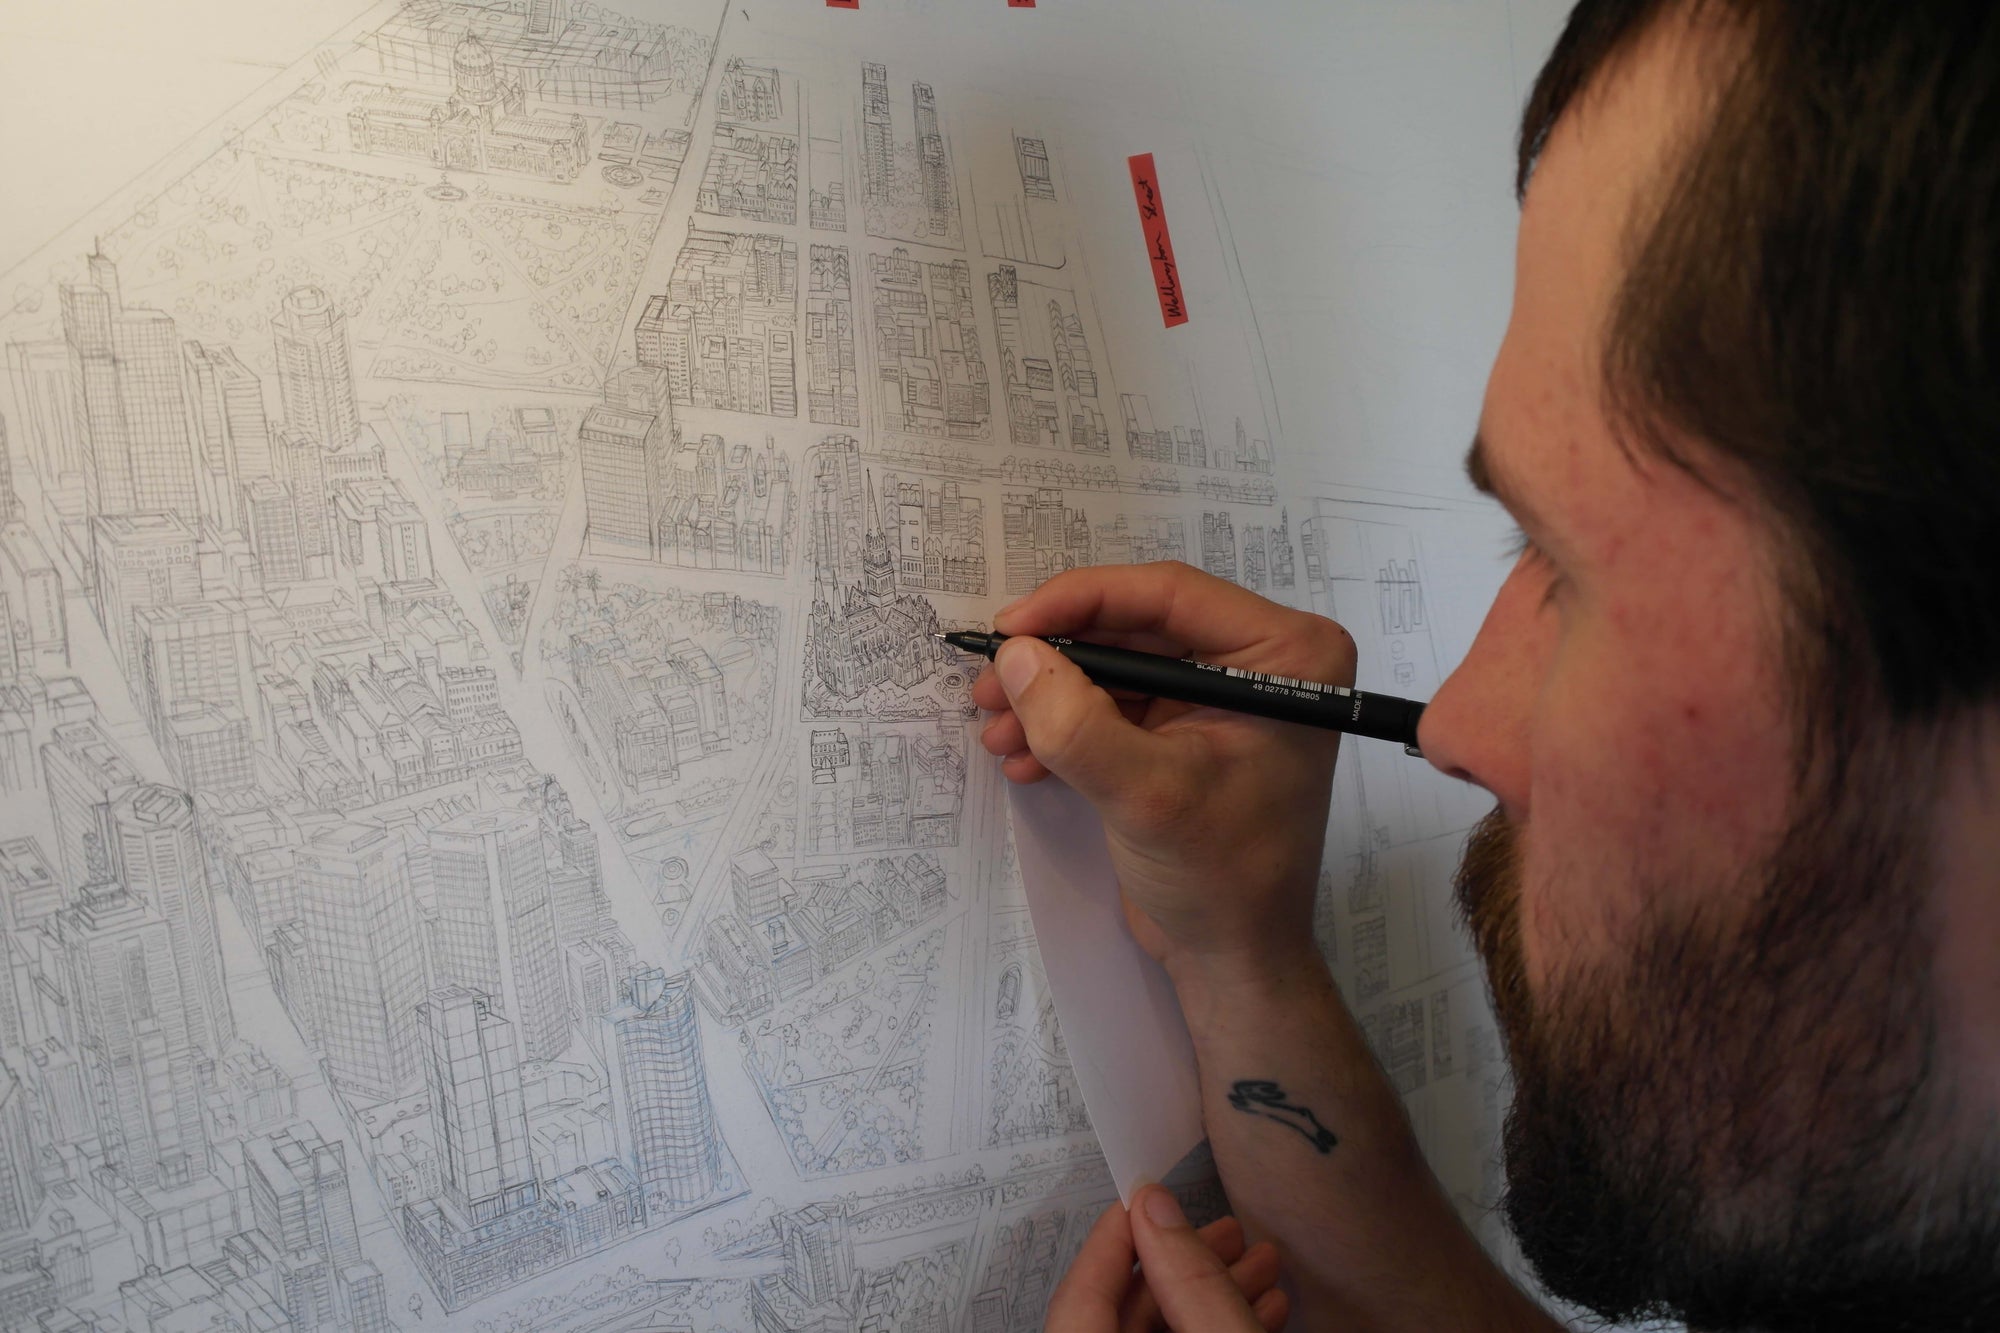 COME AND SEE THE MELBOURNE MAP BEING ILLUSTRATED